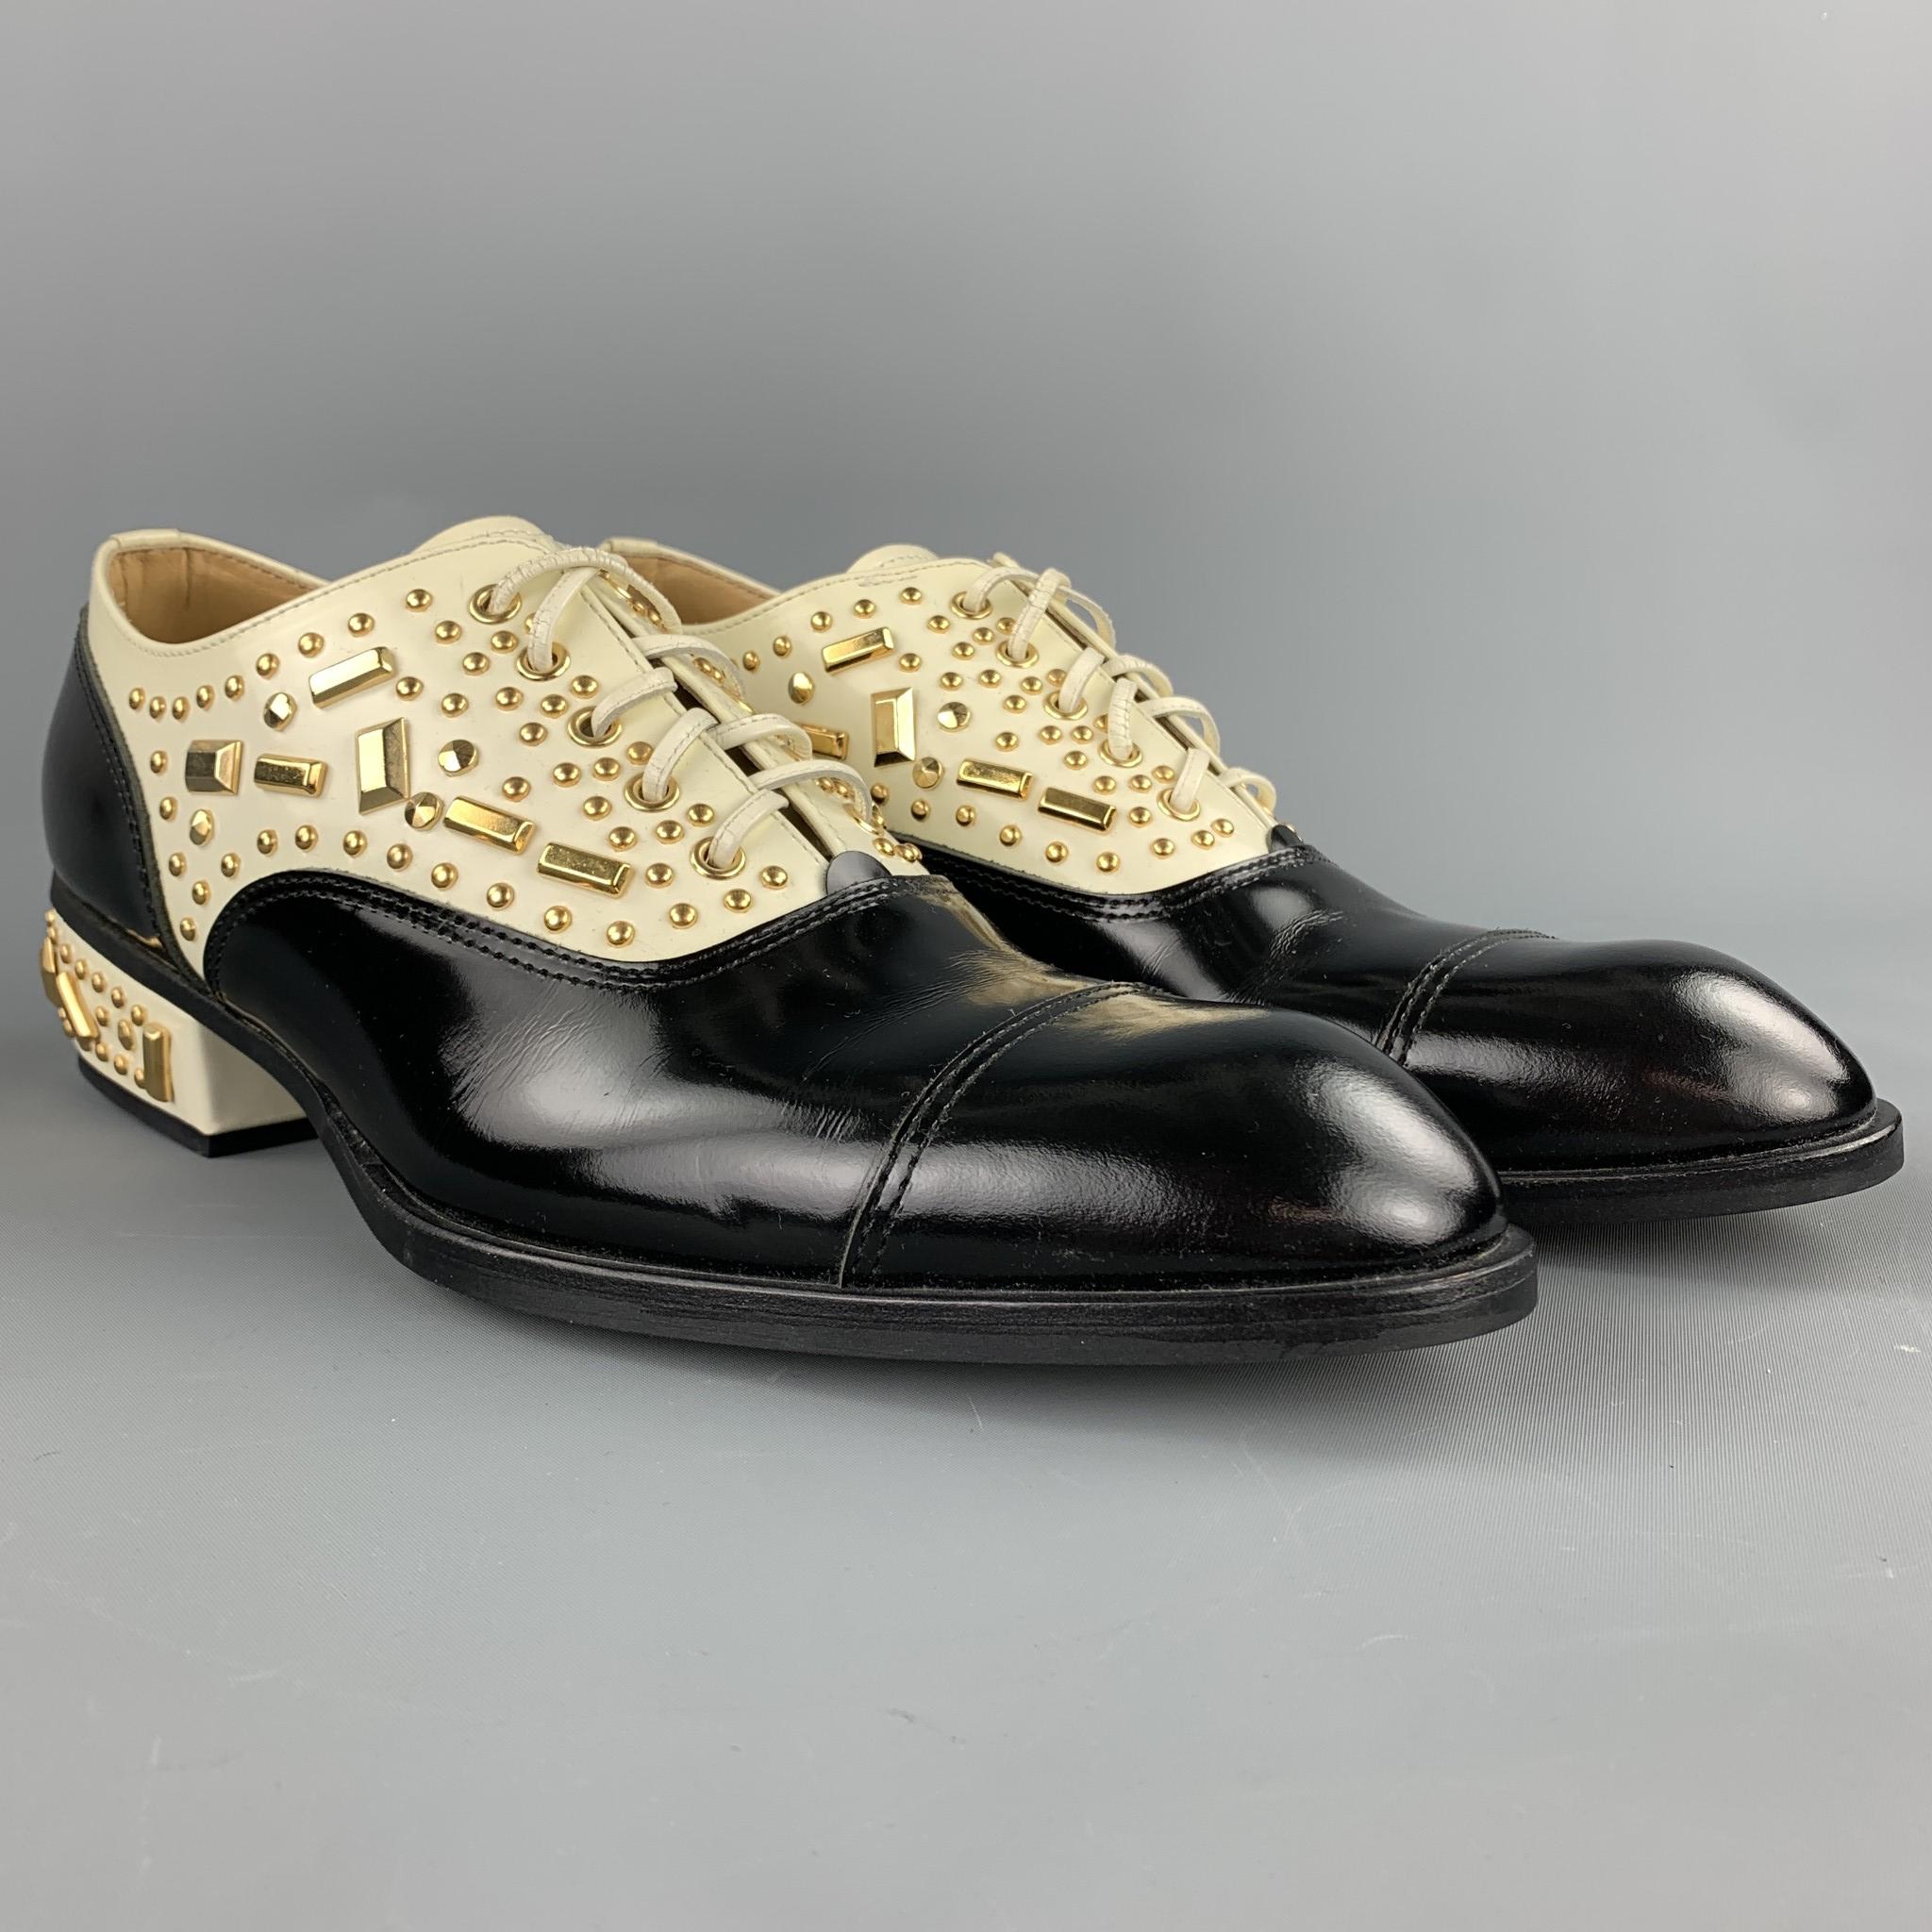 COMME des GARCONS lace up shoes comes in a black & cream leather with a studded design featuring a cap toe and a wooden sole. Made in Japan.

Very Good Pre-Owned Condition.
Marked: 28

Outsole:

12 in. x 4 in. 